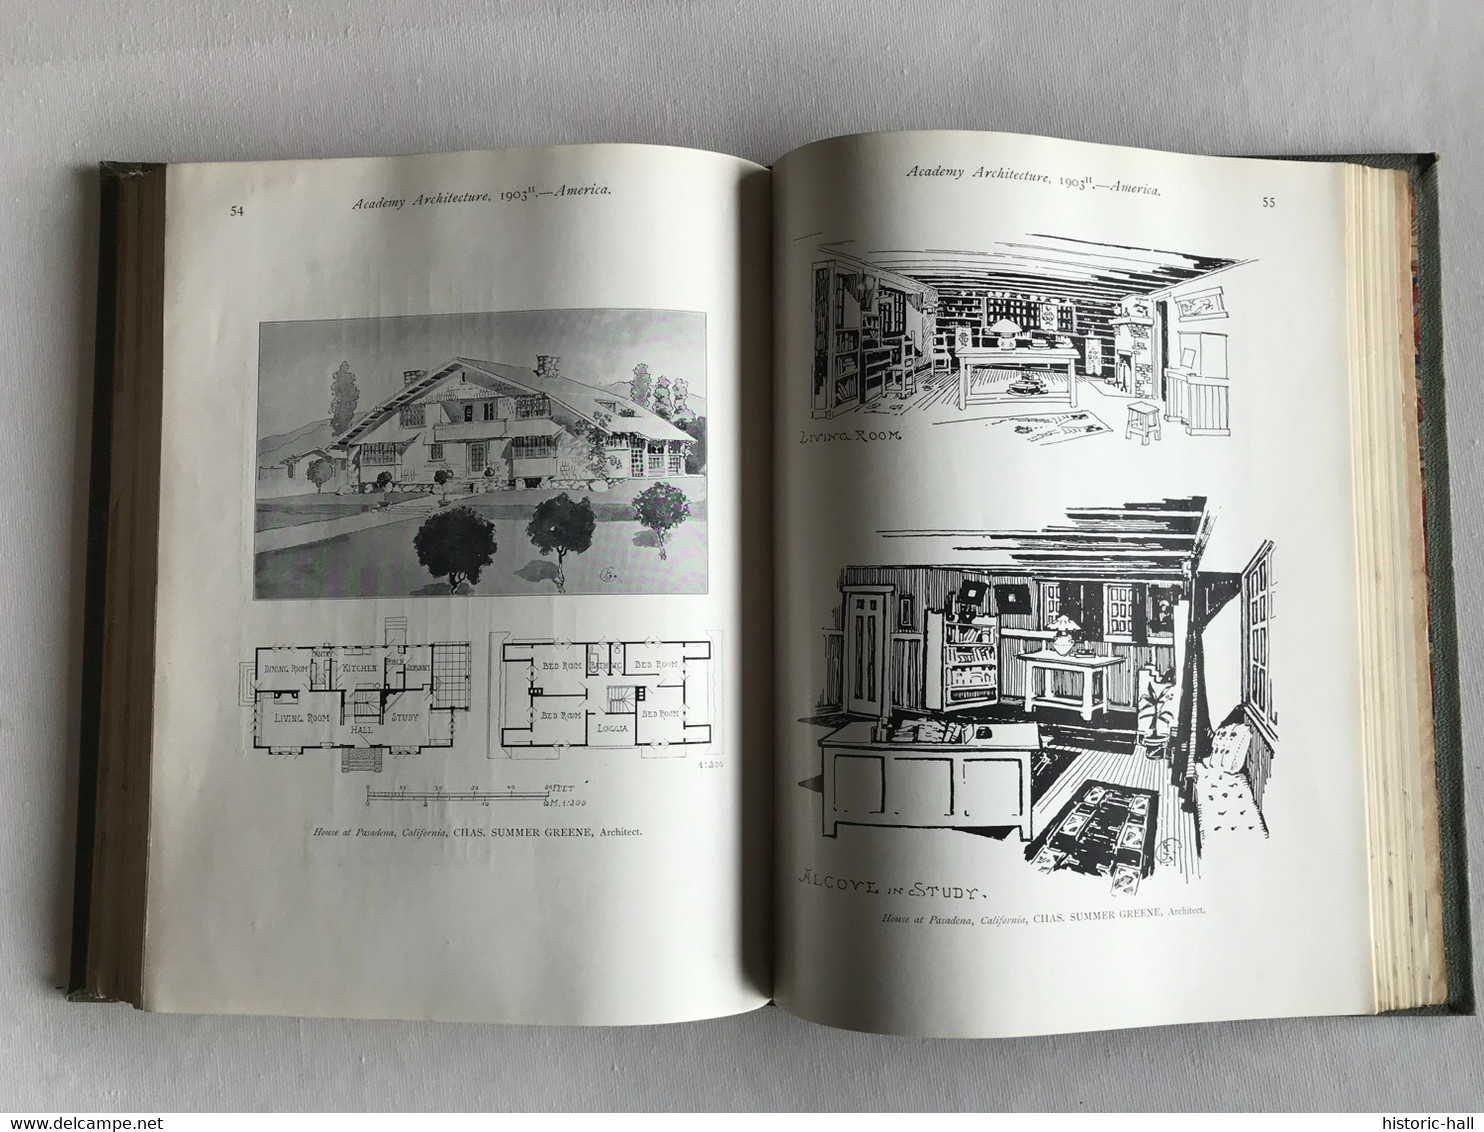 ACADEMY ARCHITECTURE & Architectural Review - vol 23 & 24 - 1903 - Alexander KOCH